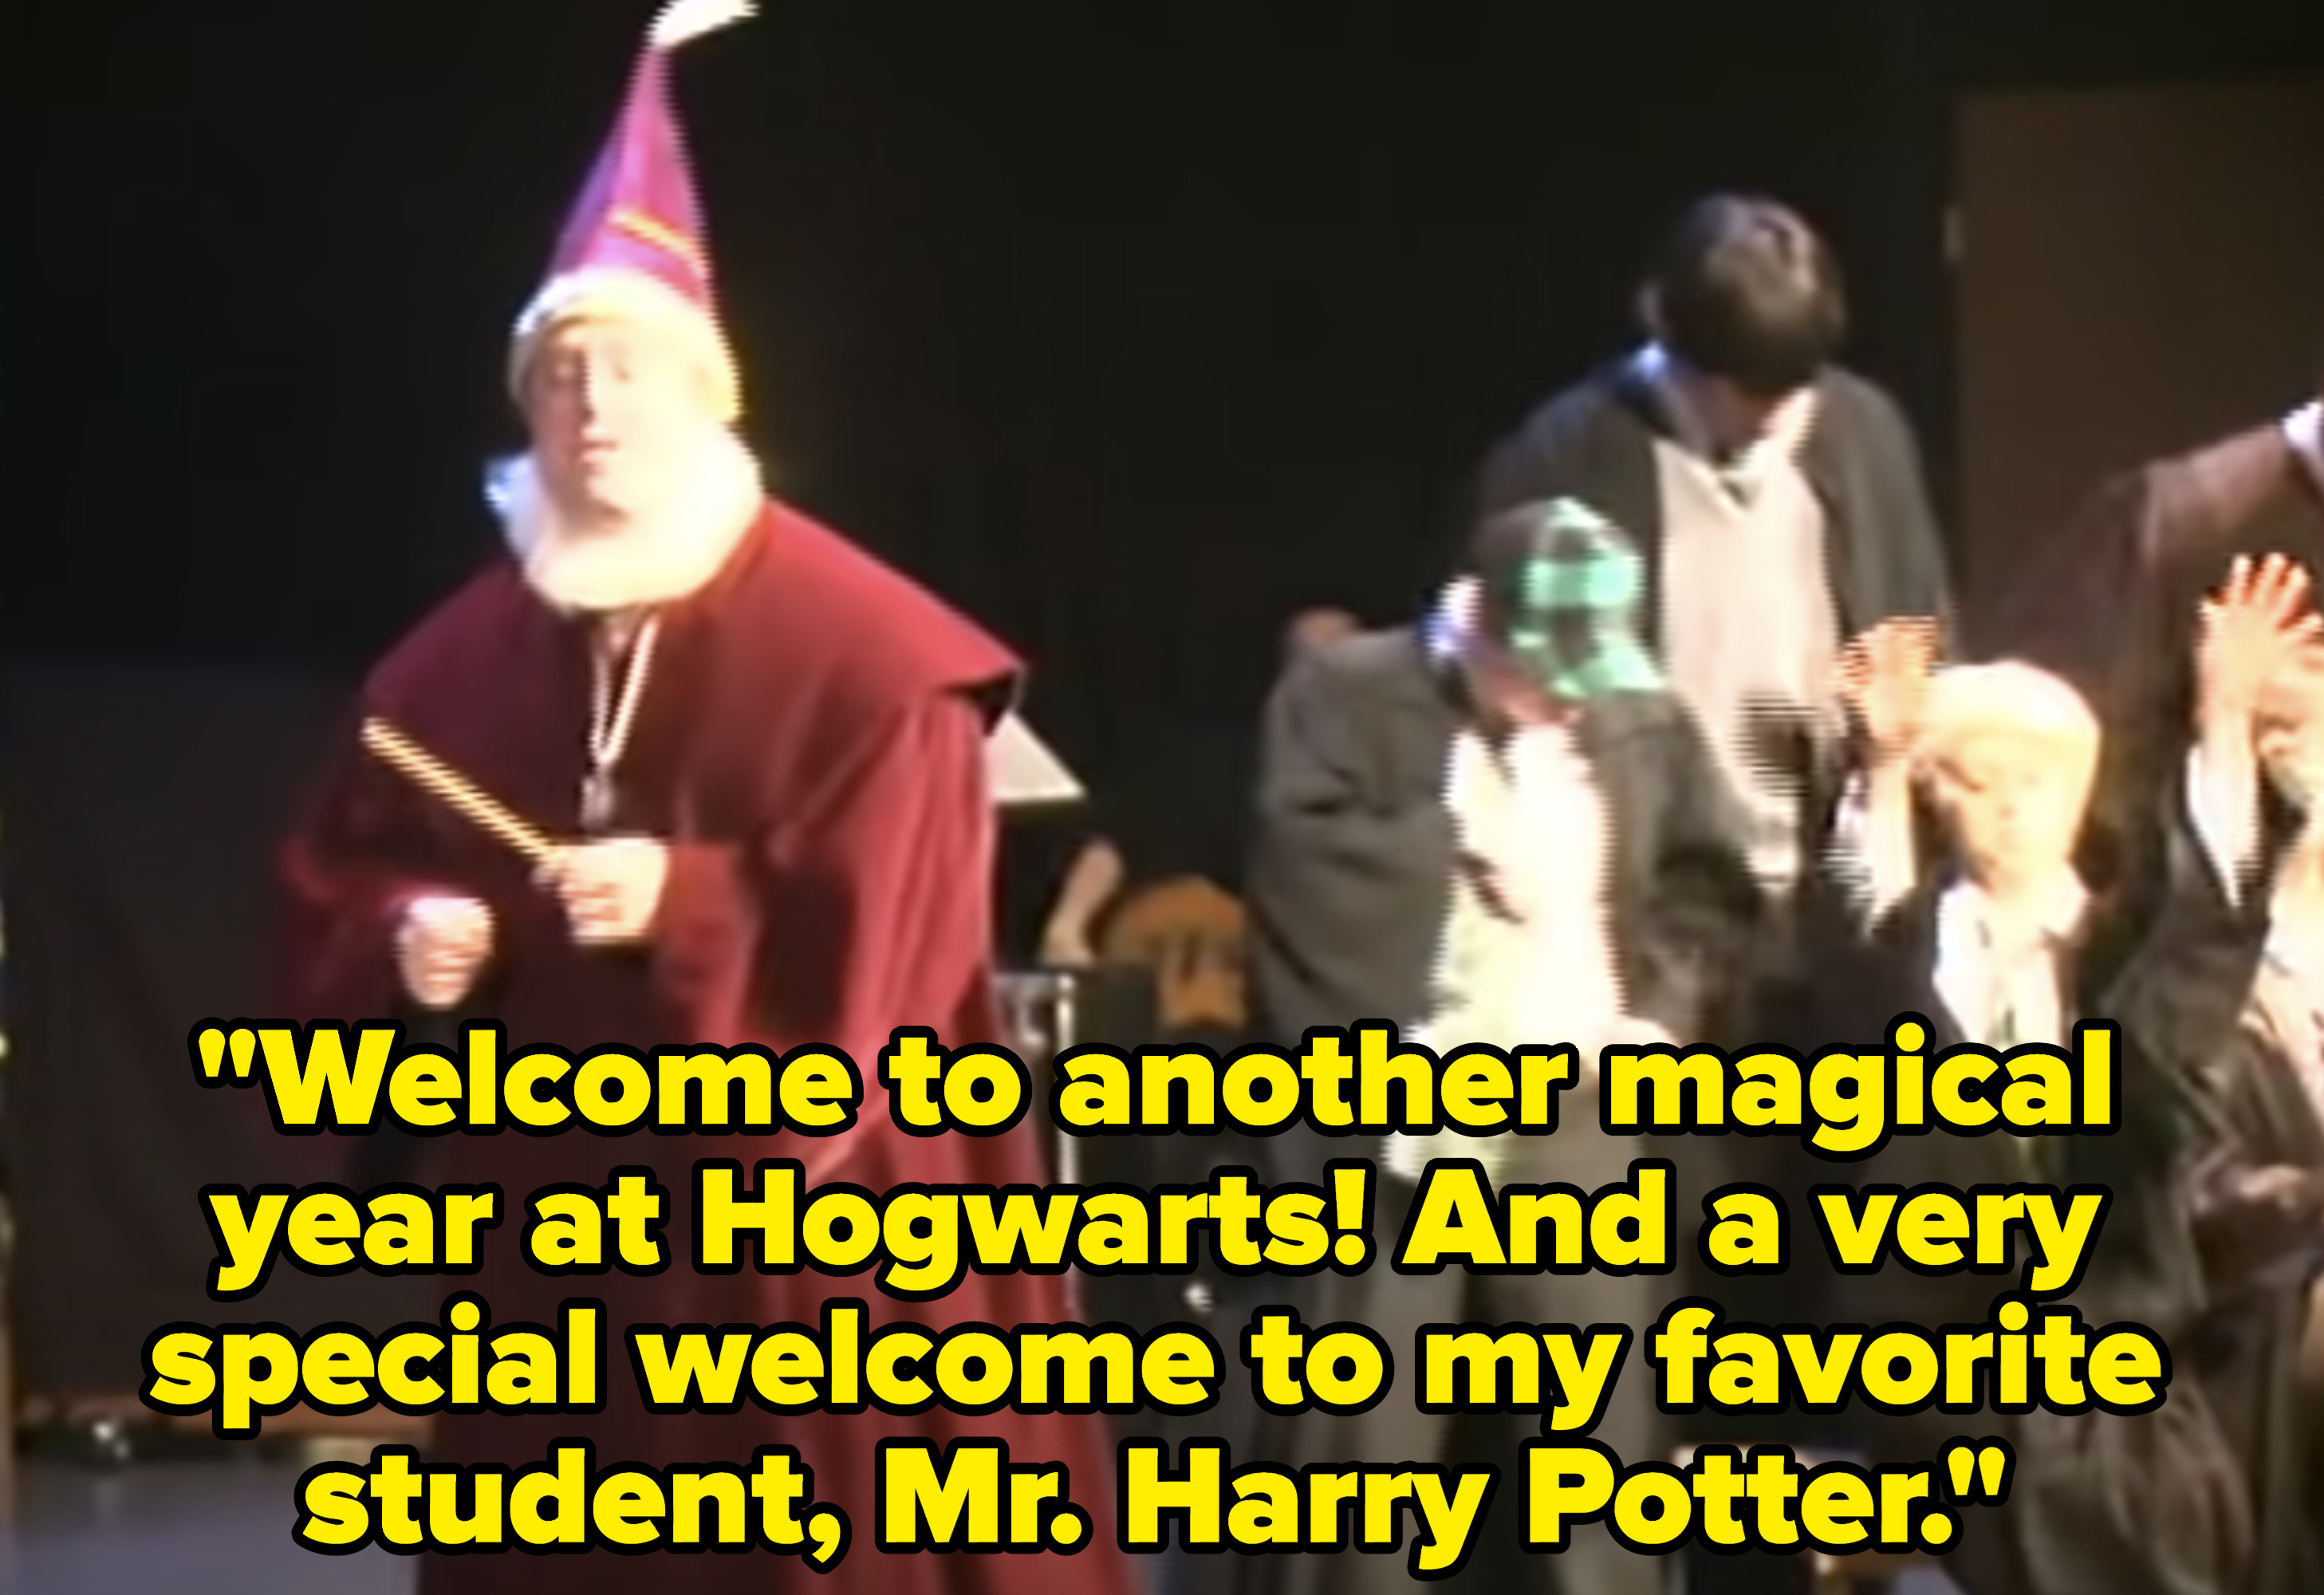 Dumbledore says welcome, but especially to his favorite student Harry